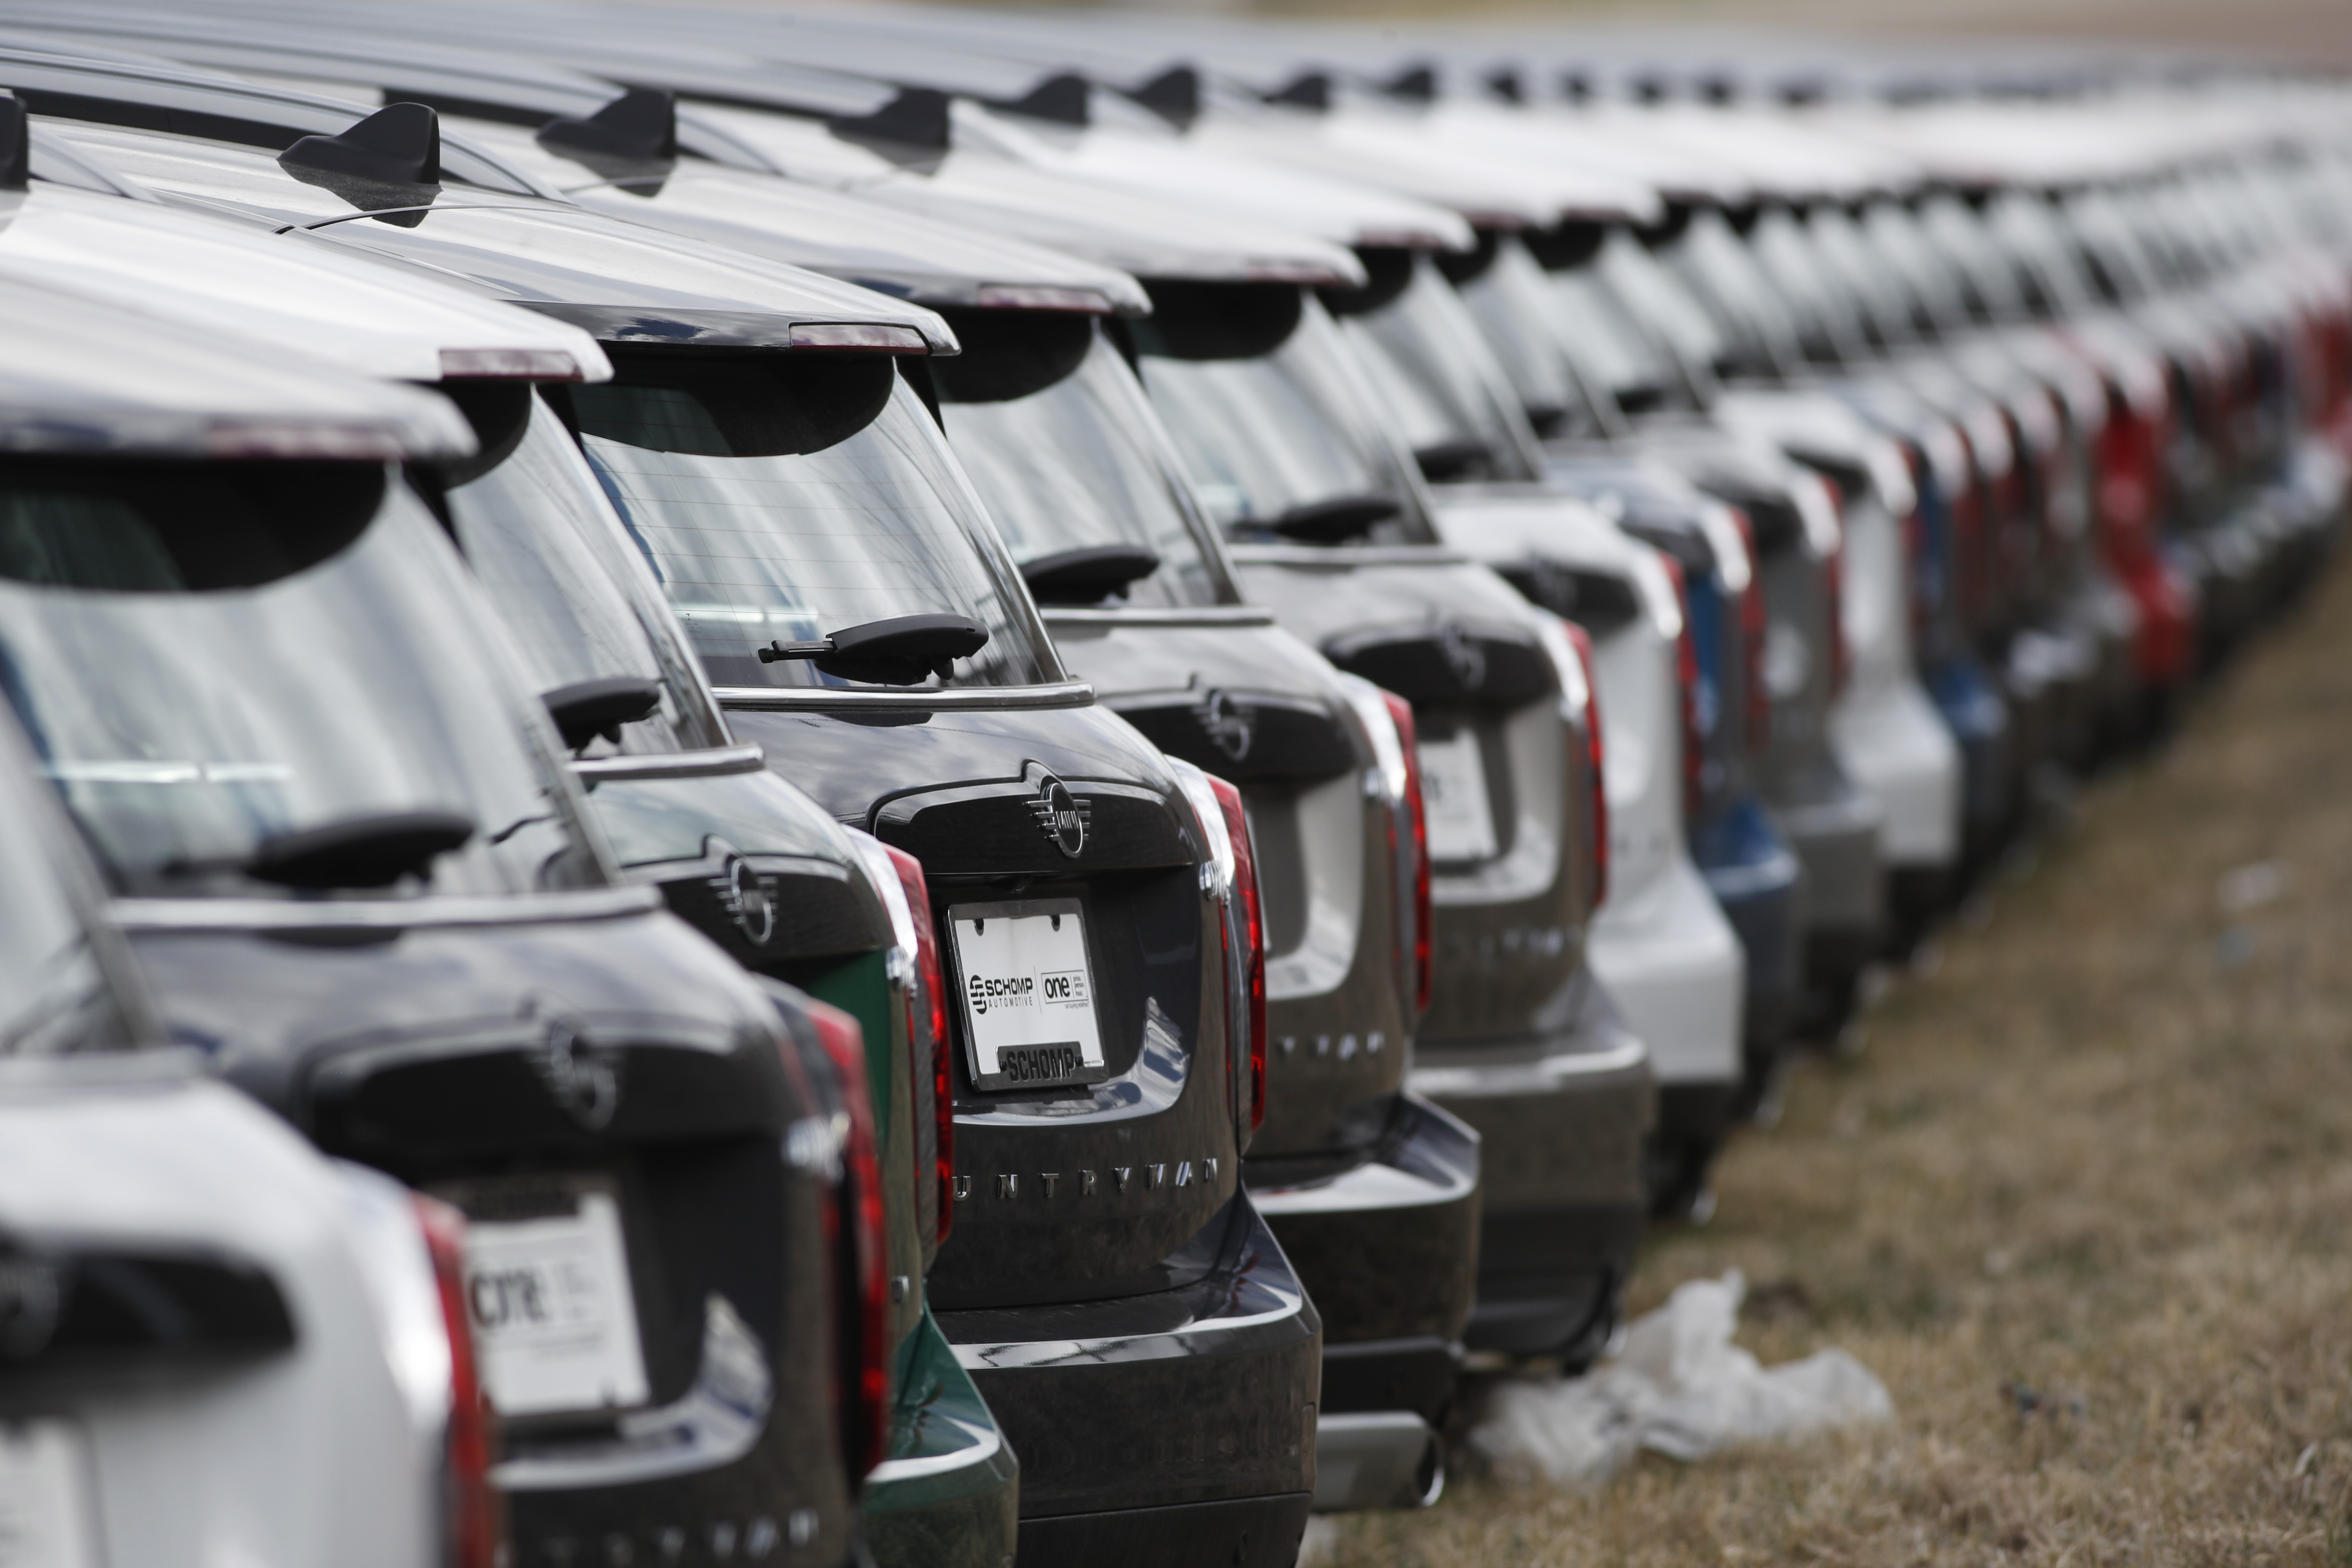 In this Sunday, April 5, 2020, photograph, a long row of unsold 2020 Countryman sports-utility vehicles sits at a Mini dealership in Highlands Ranch, Colo. (AP Photo/David Zalubowski)